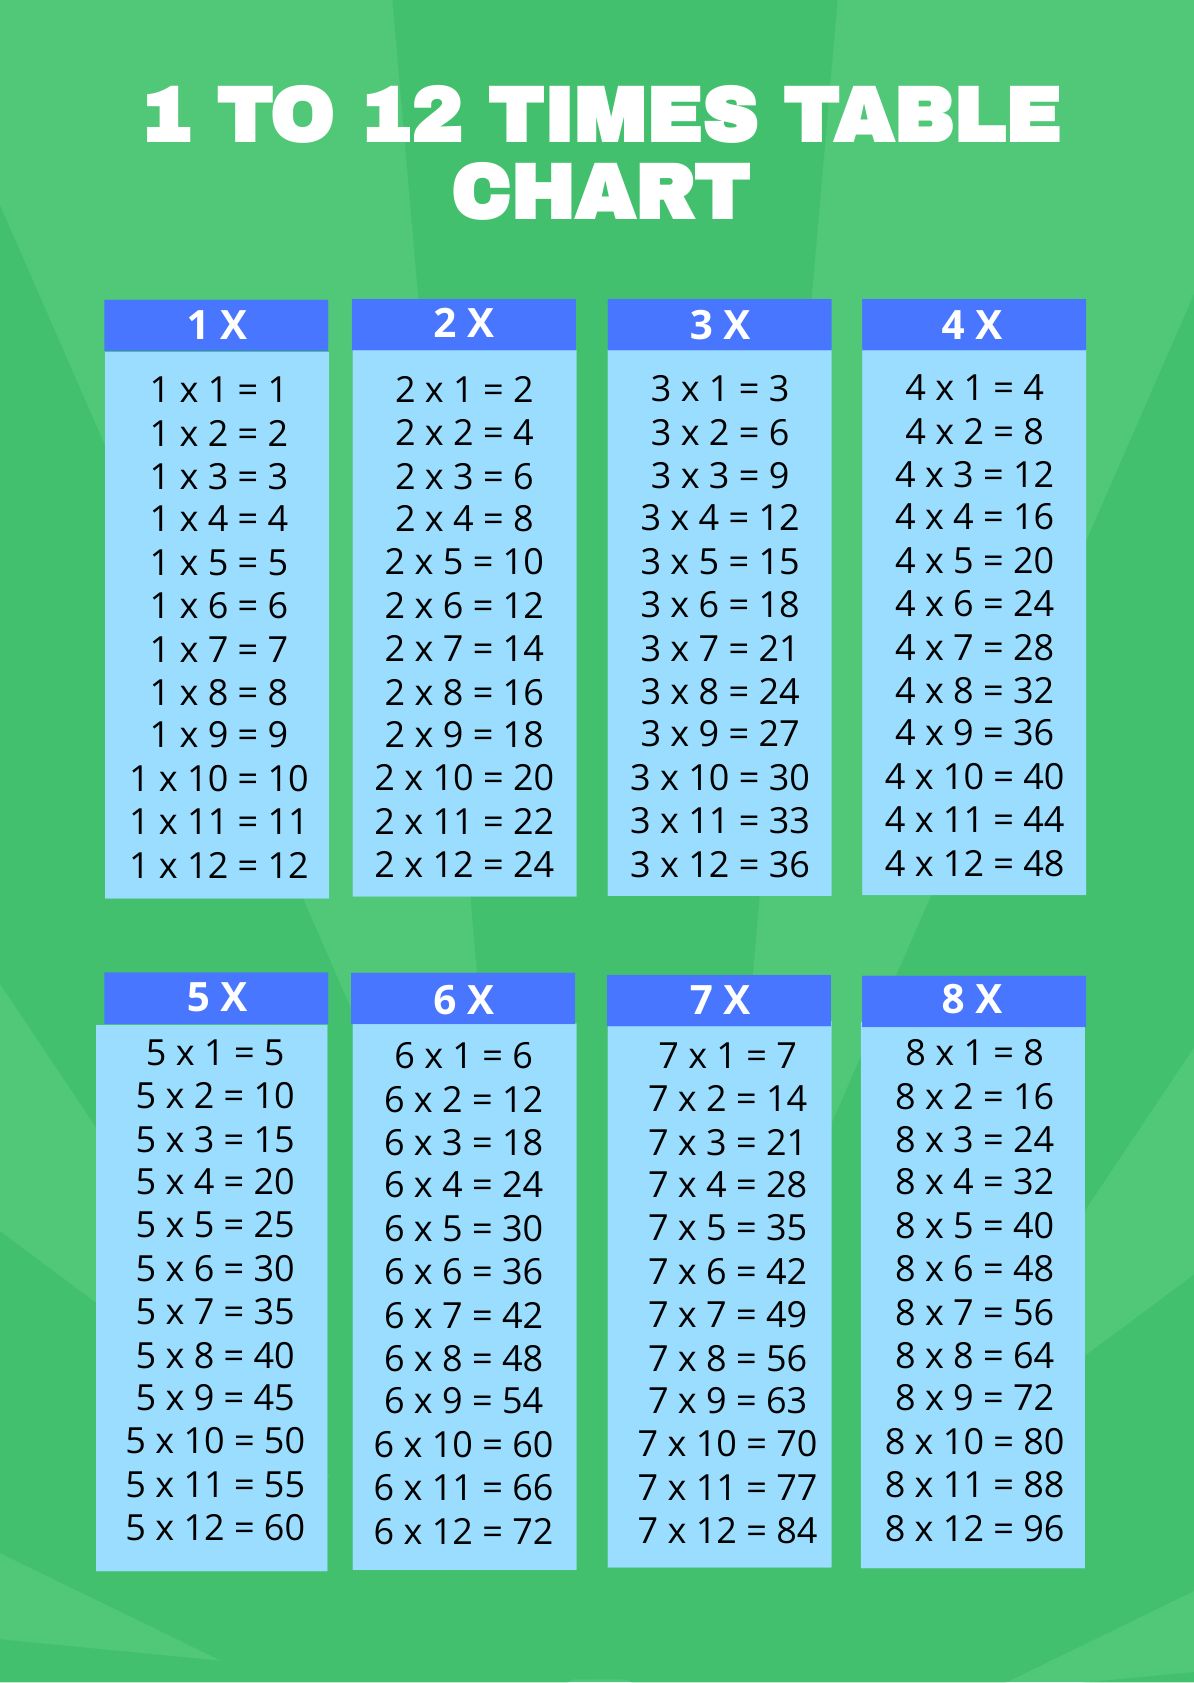 free-times-table-chart-1-12-download-in-pdf-template